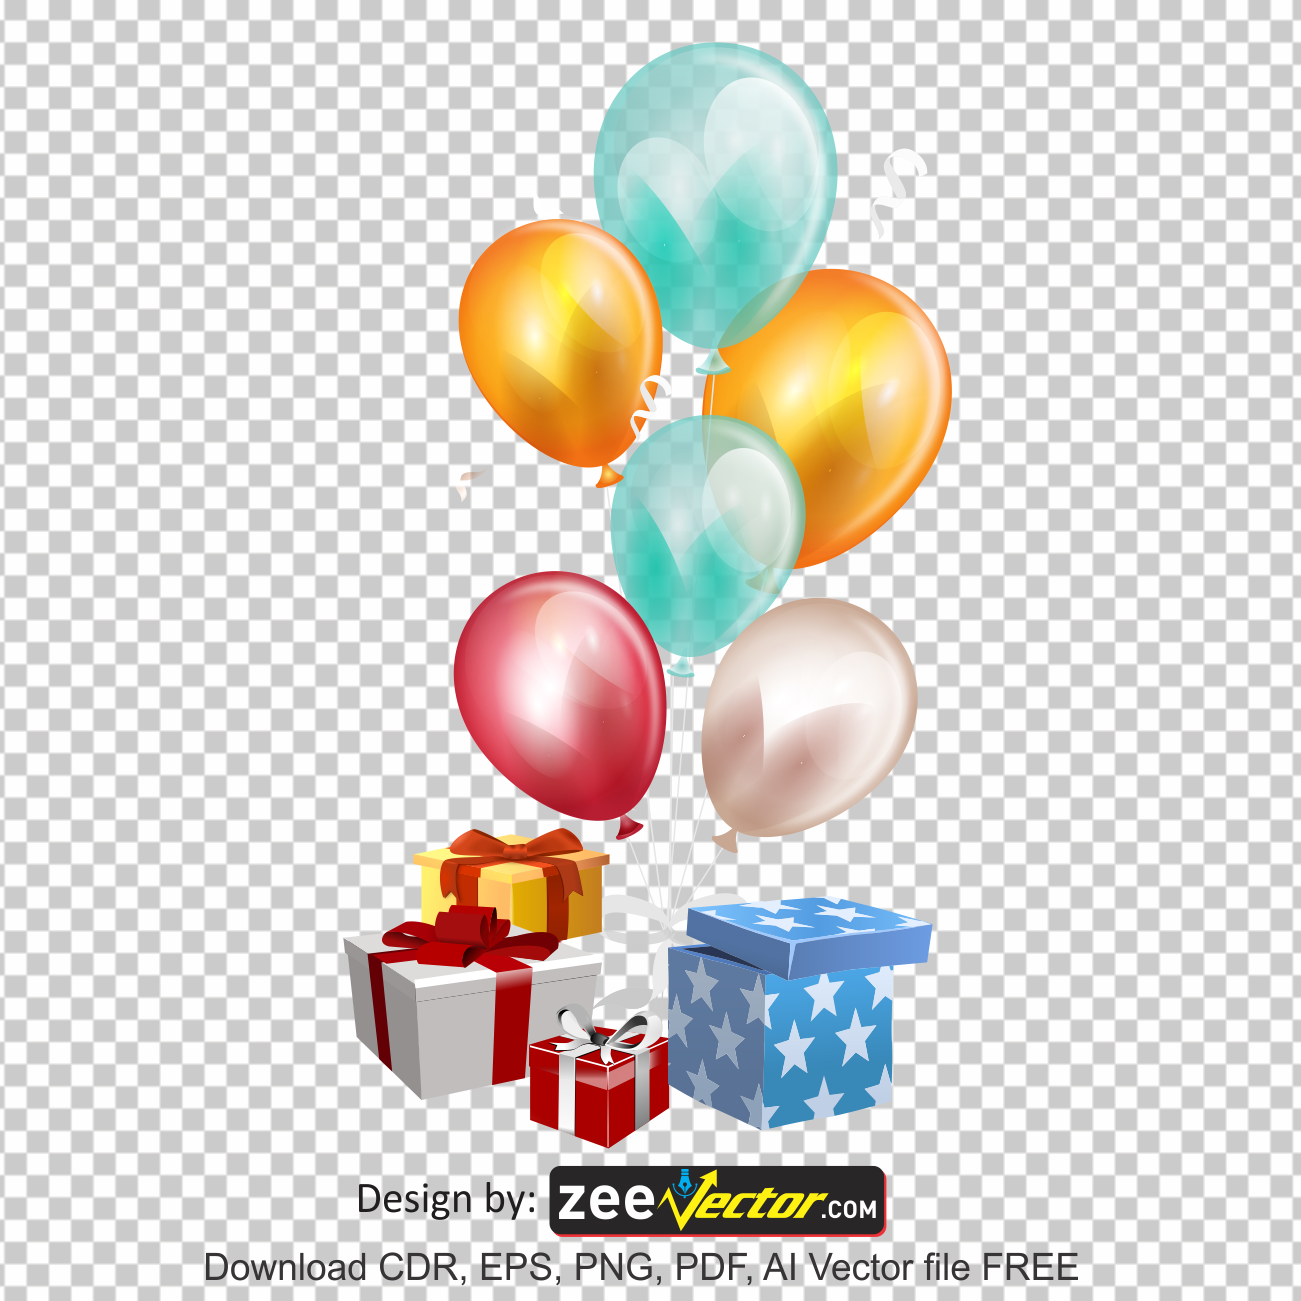 Free-Balloon-Images-For-Birthday